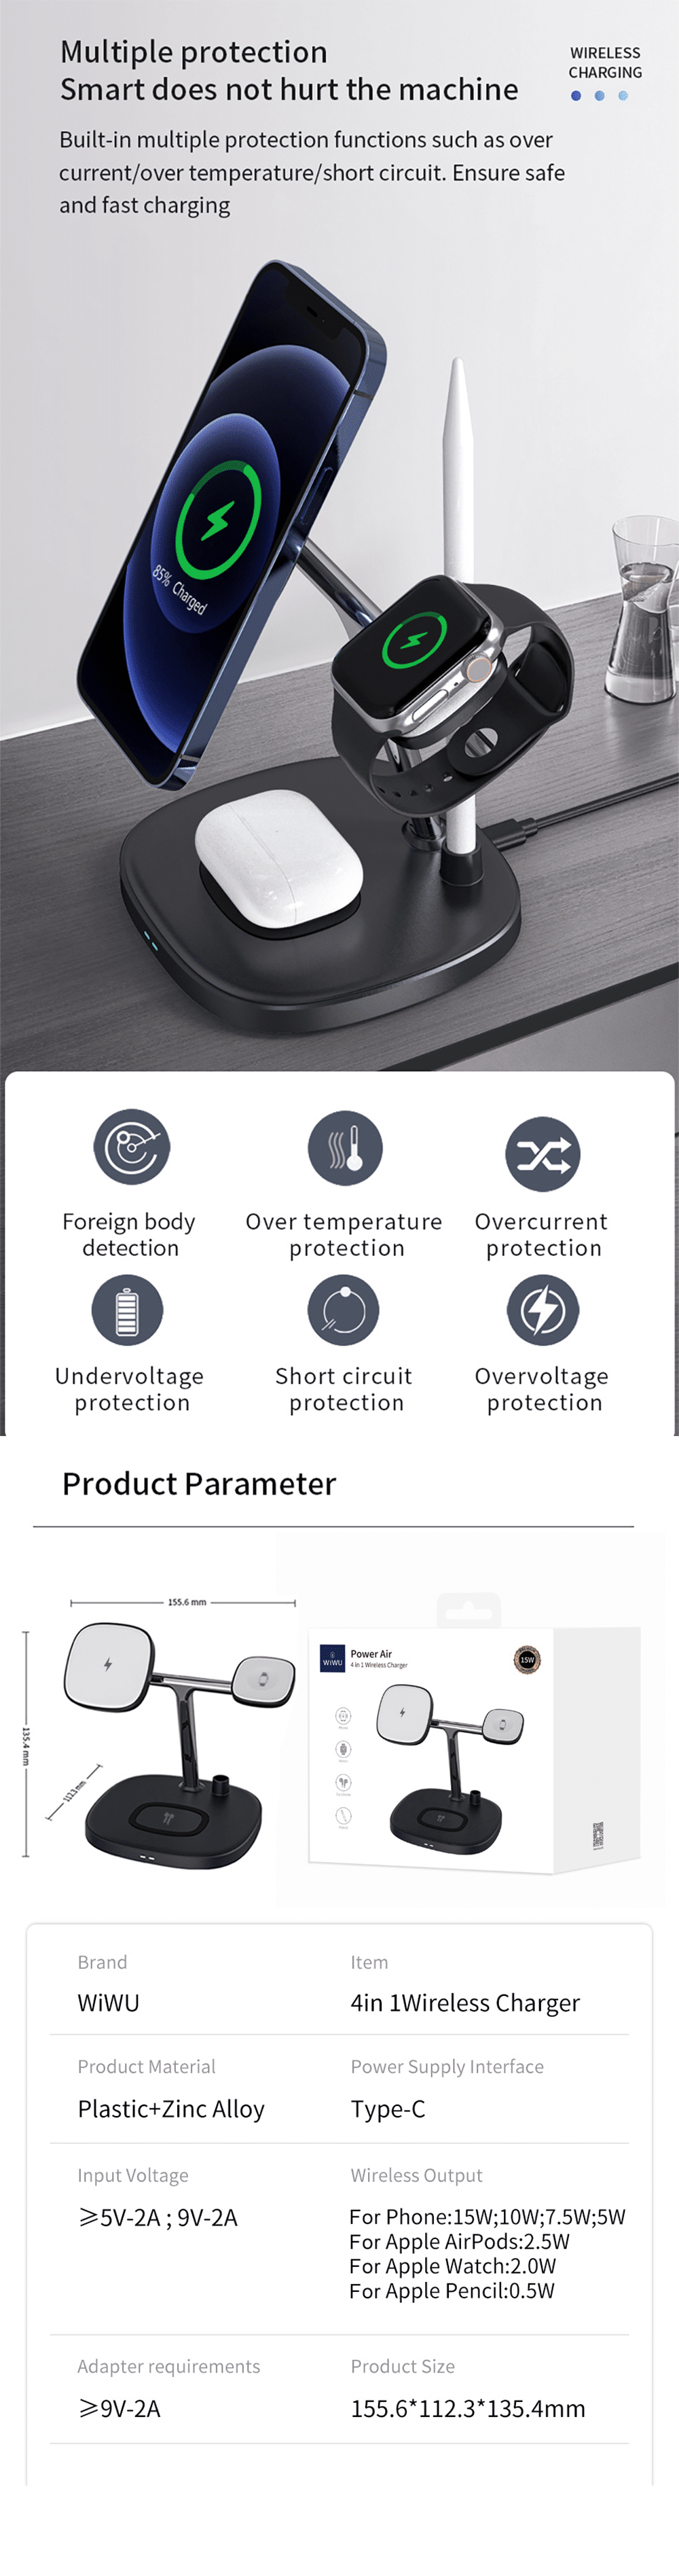 WiWU M8 Power Air 15W 4 in 1 Wireless Charger 5